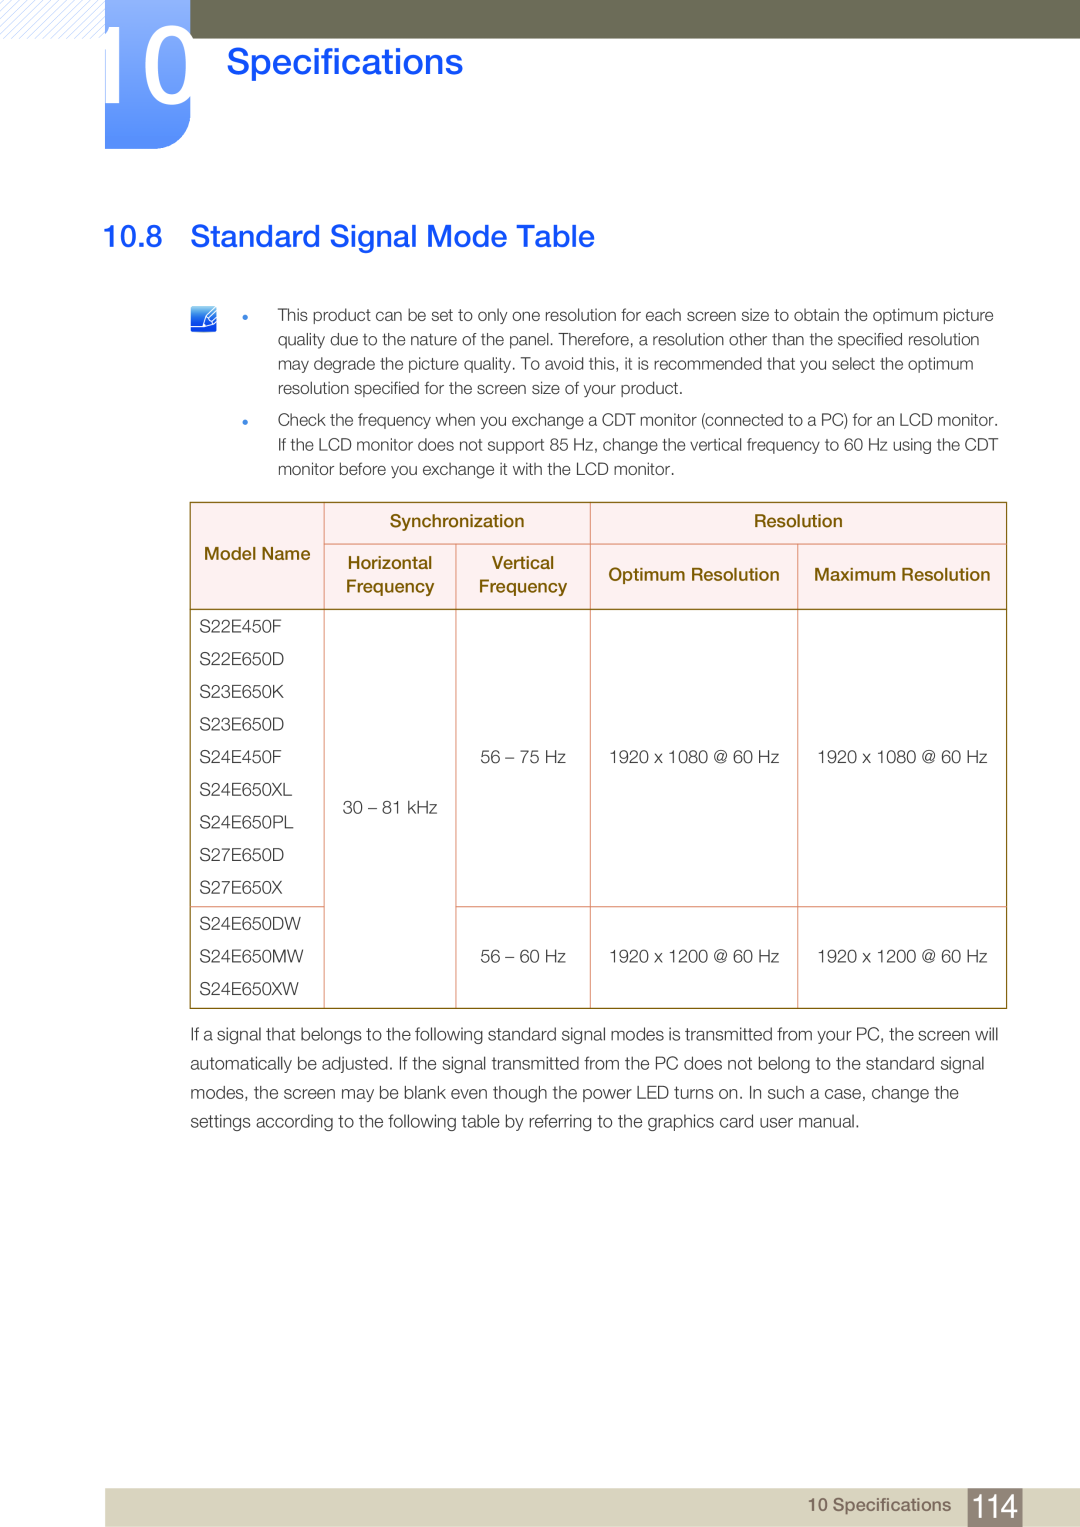 Samsung LS24E65UPLC/XE Standard Signal Mode Table, Specifications, Synchronization, Resolution, Model Name, Horizontal 